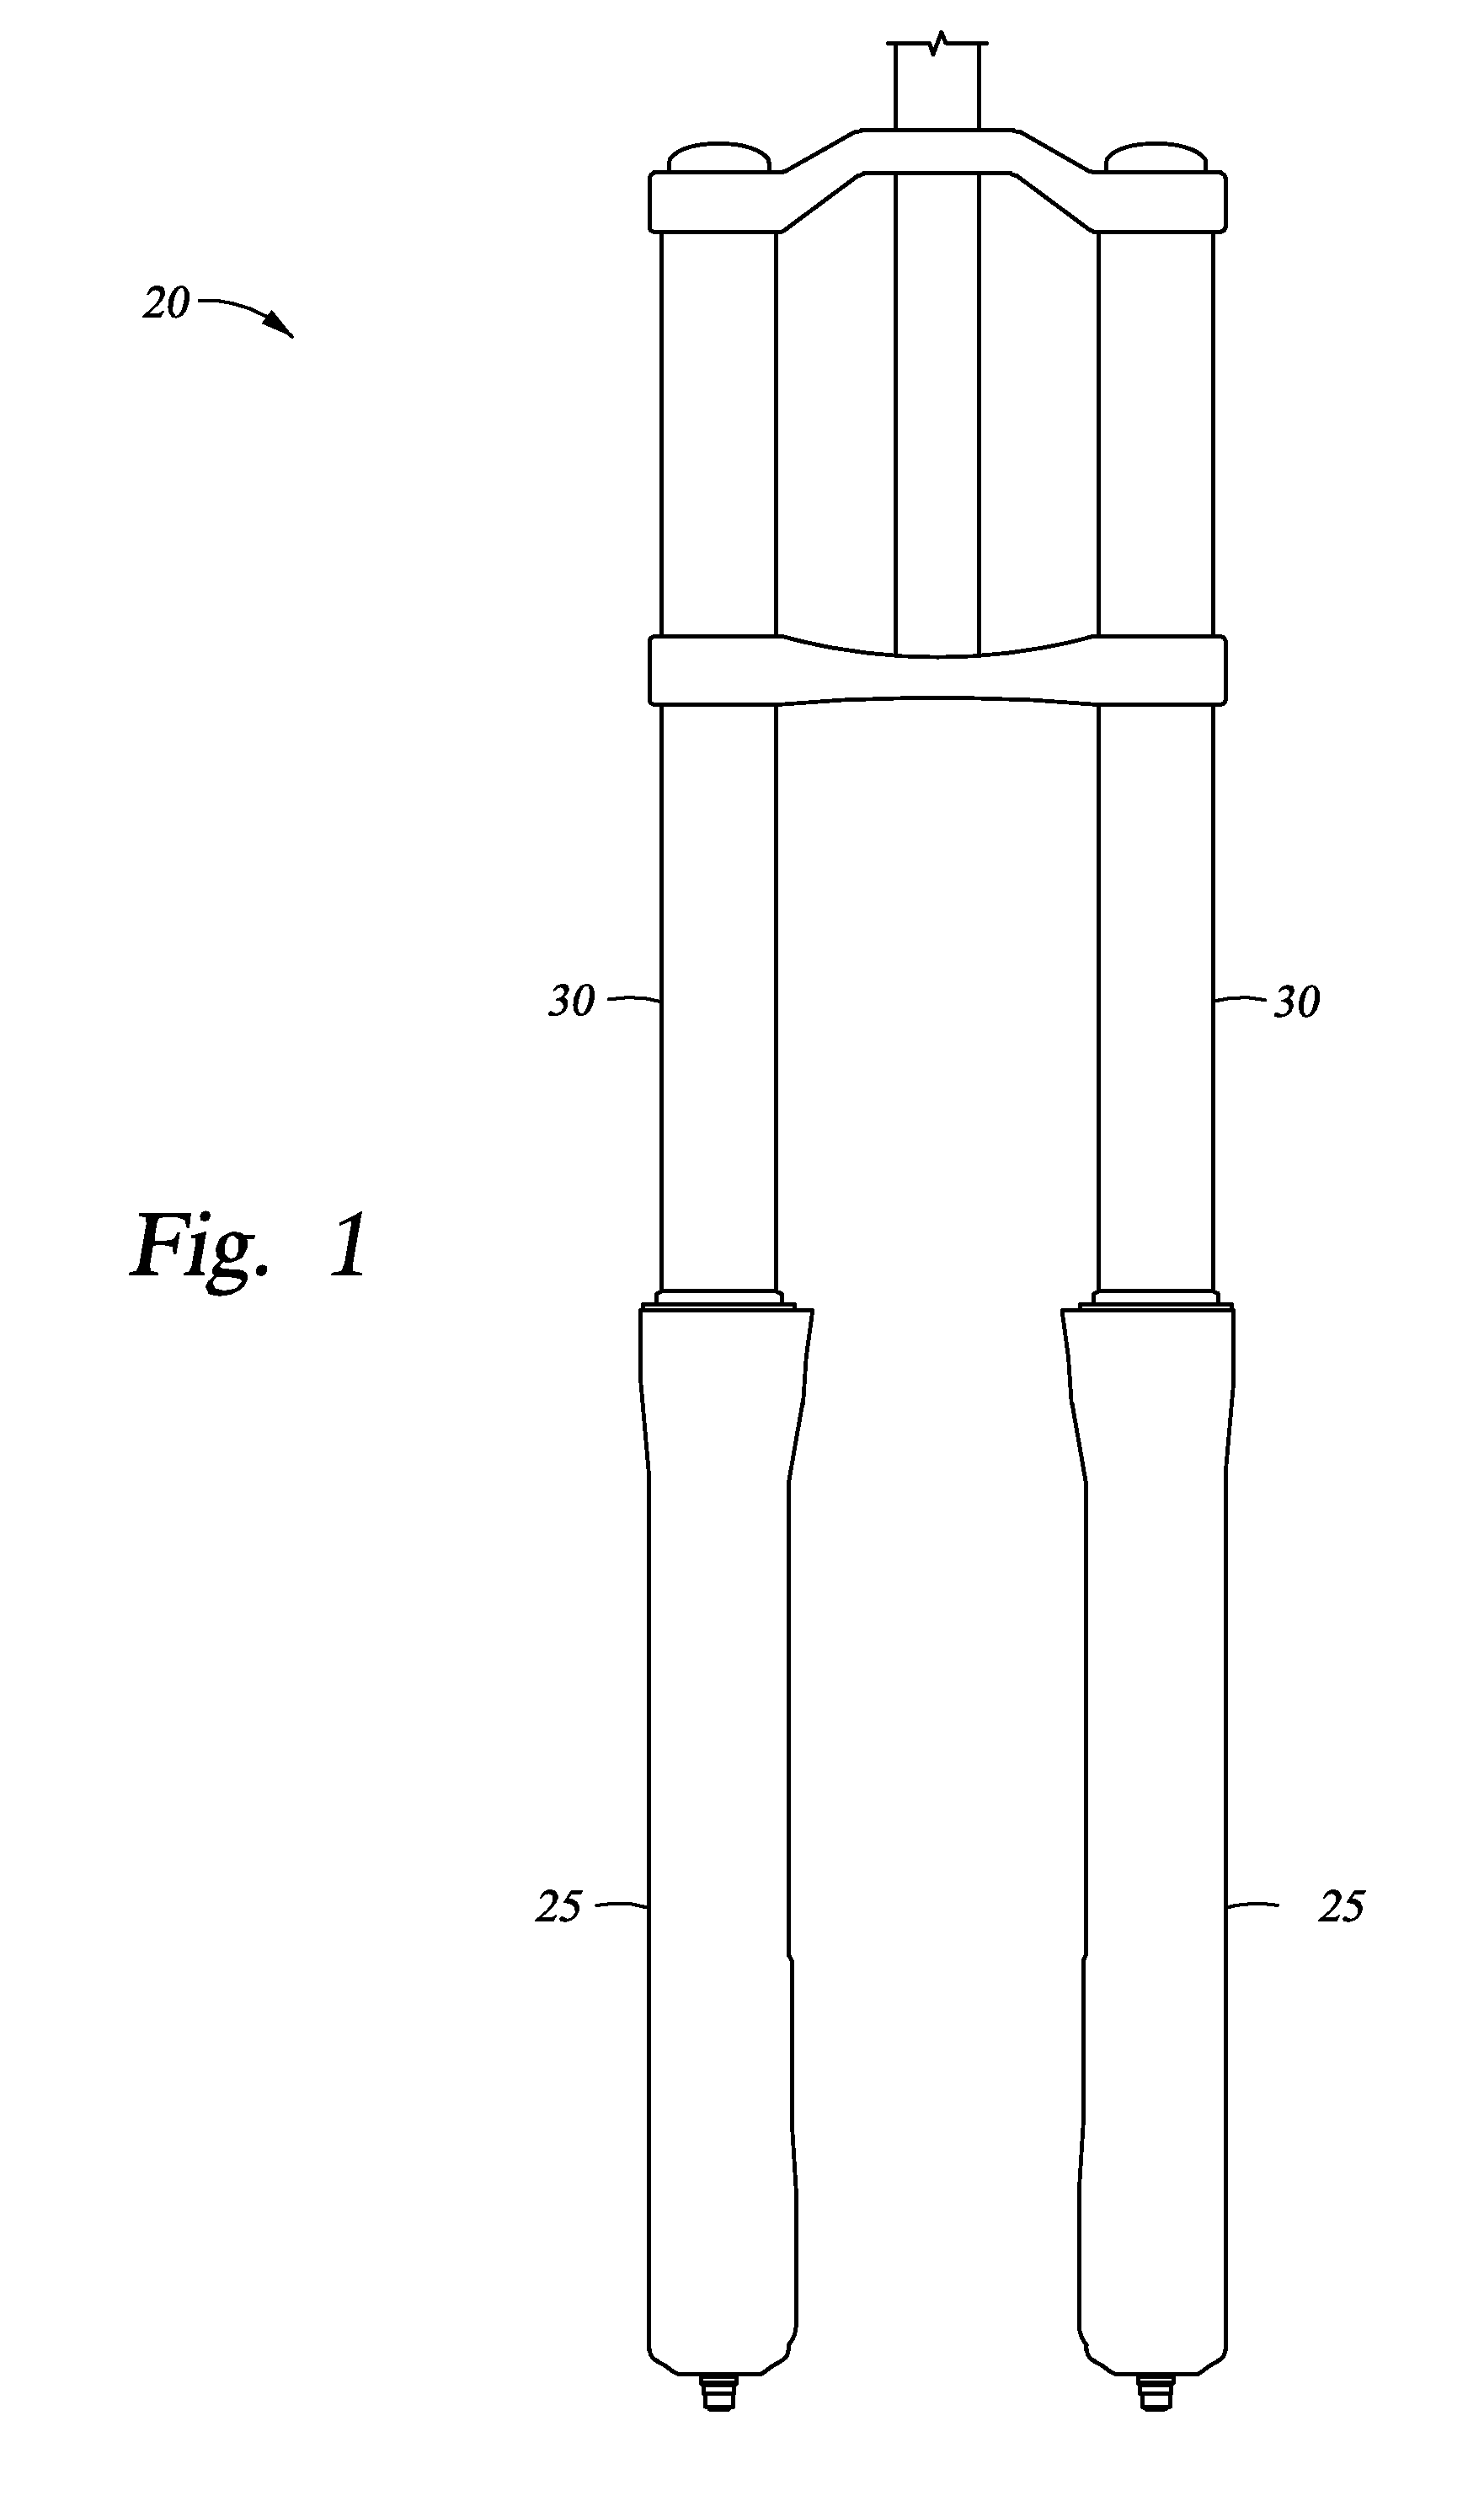 Methods and apparatus for suspending vehicles